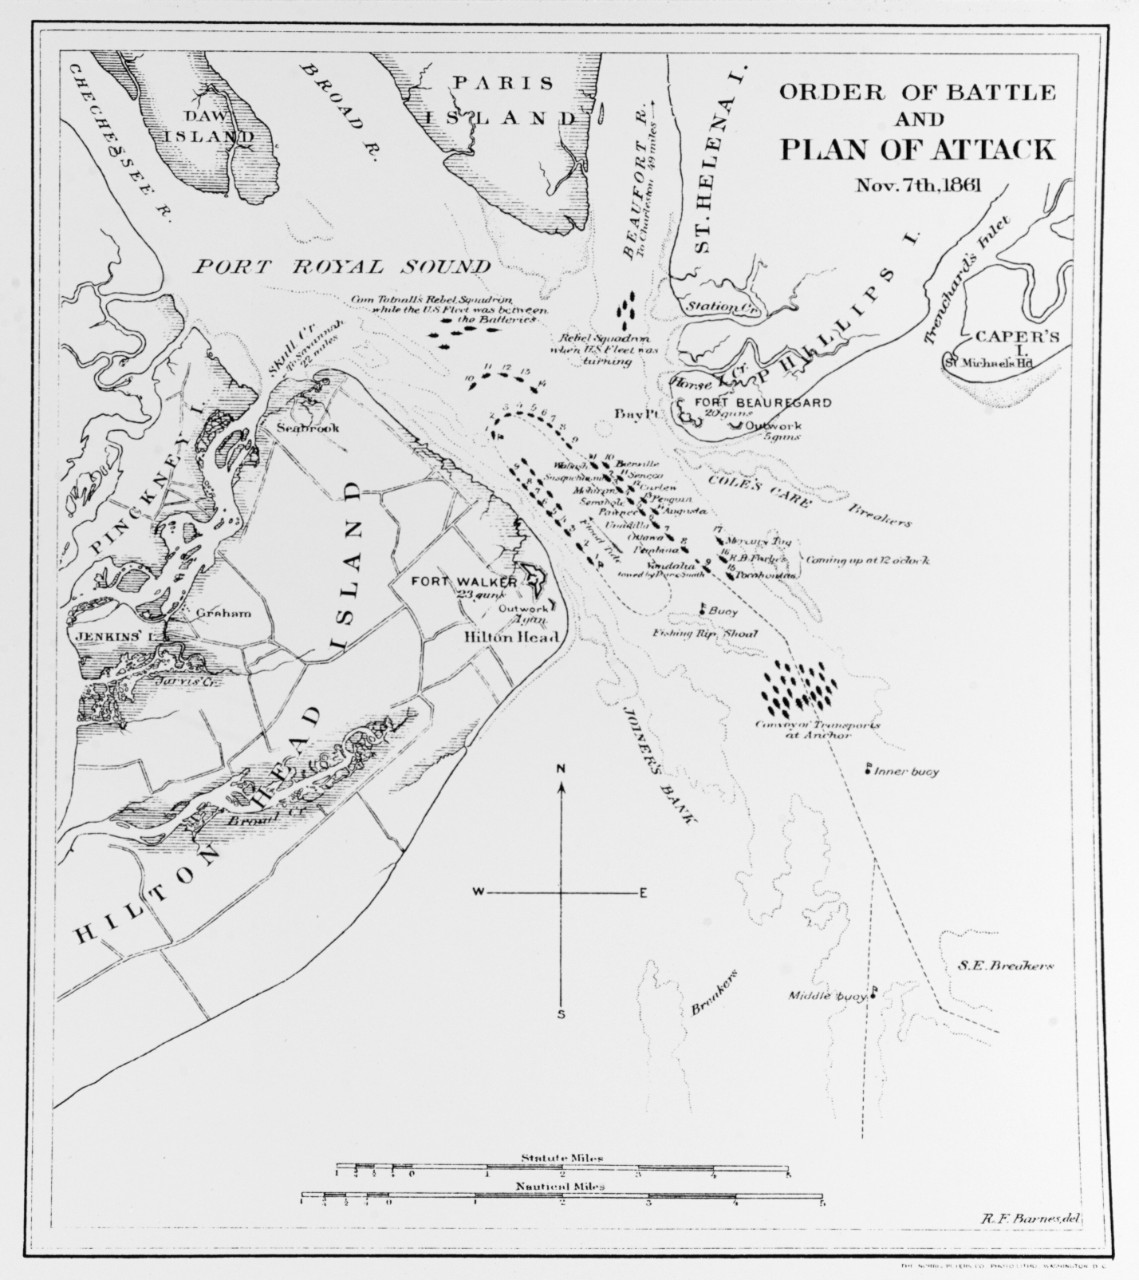 The order of battle and plan of attack mapped out on coastal survey drawing